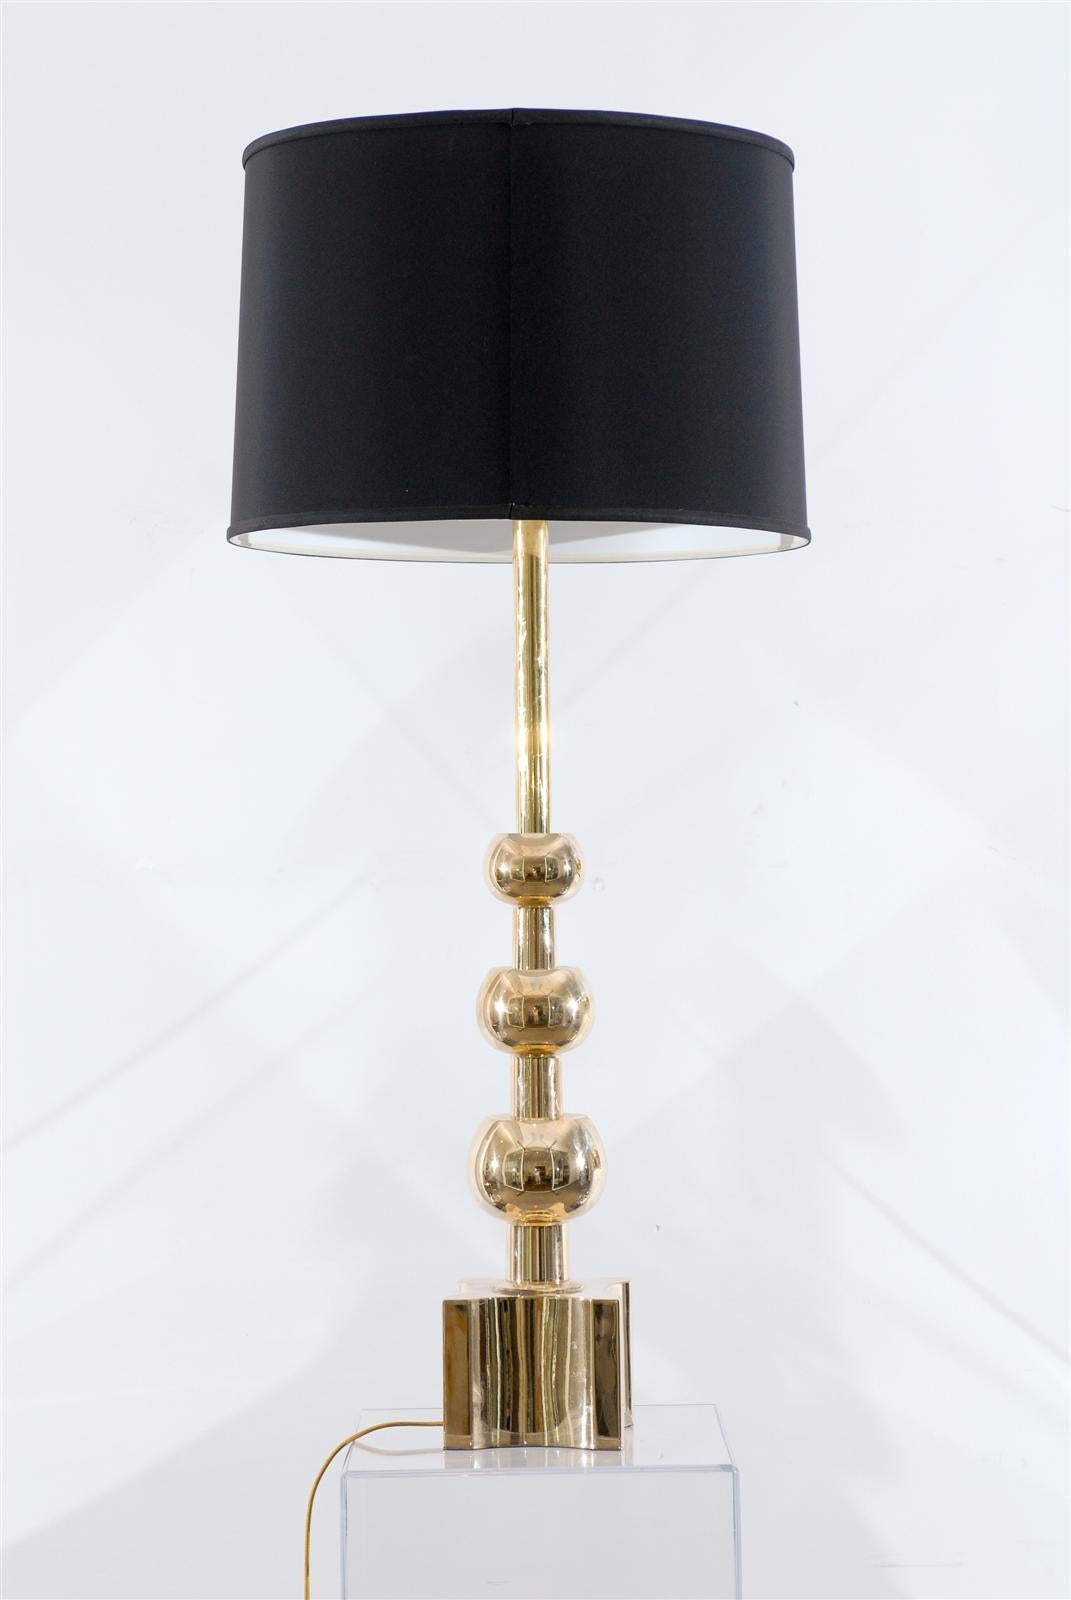 Beautiful pair of graduated brass ball pagoda lamps by Stiffel.
Restored and rewired with new gold silk cords. Height noted is to top of finial. The price listed is for the pair. Optional black or cream shades.